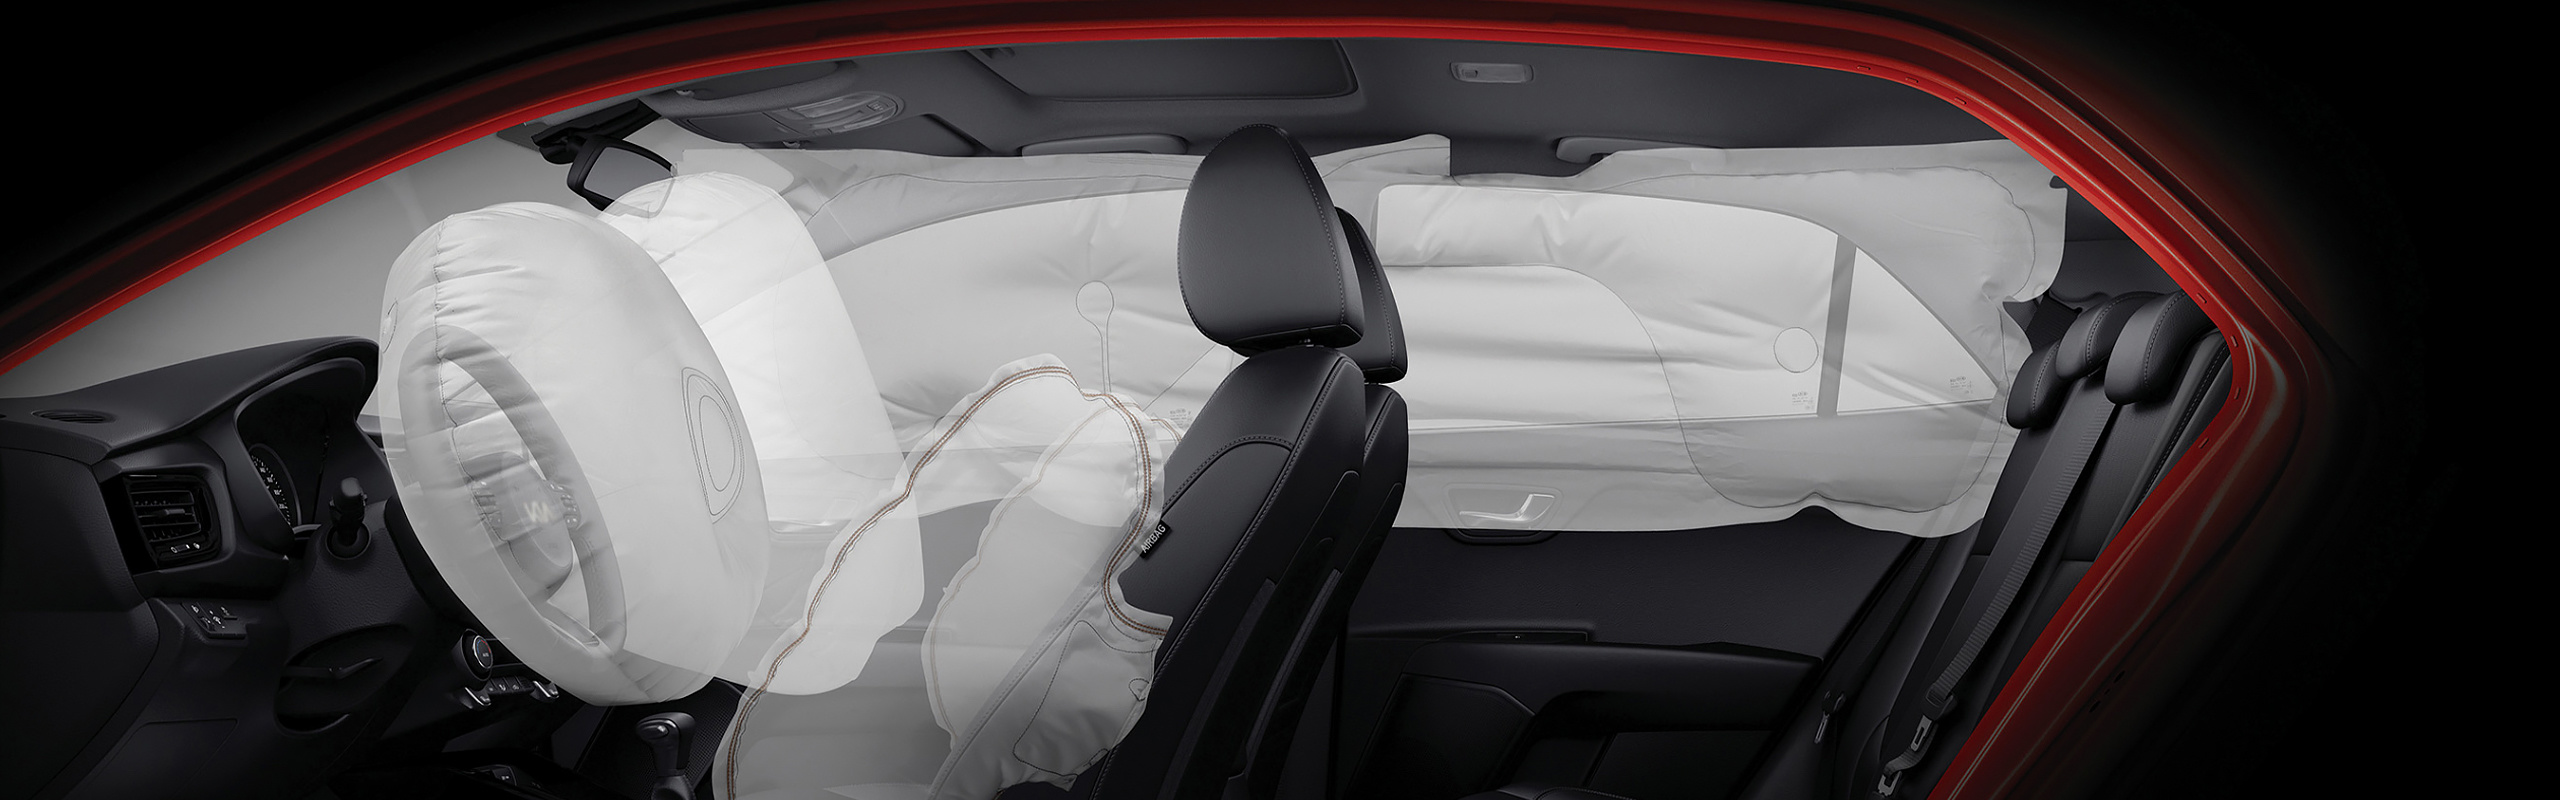 Kia safety features, advanced airbag system visualization